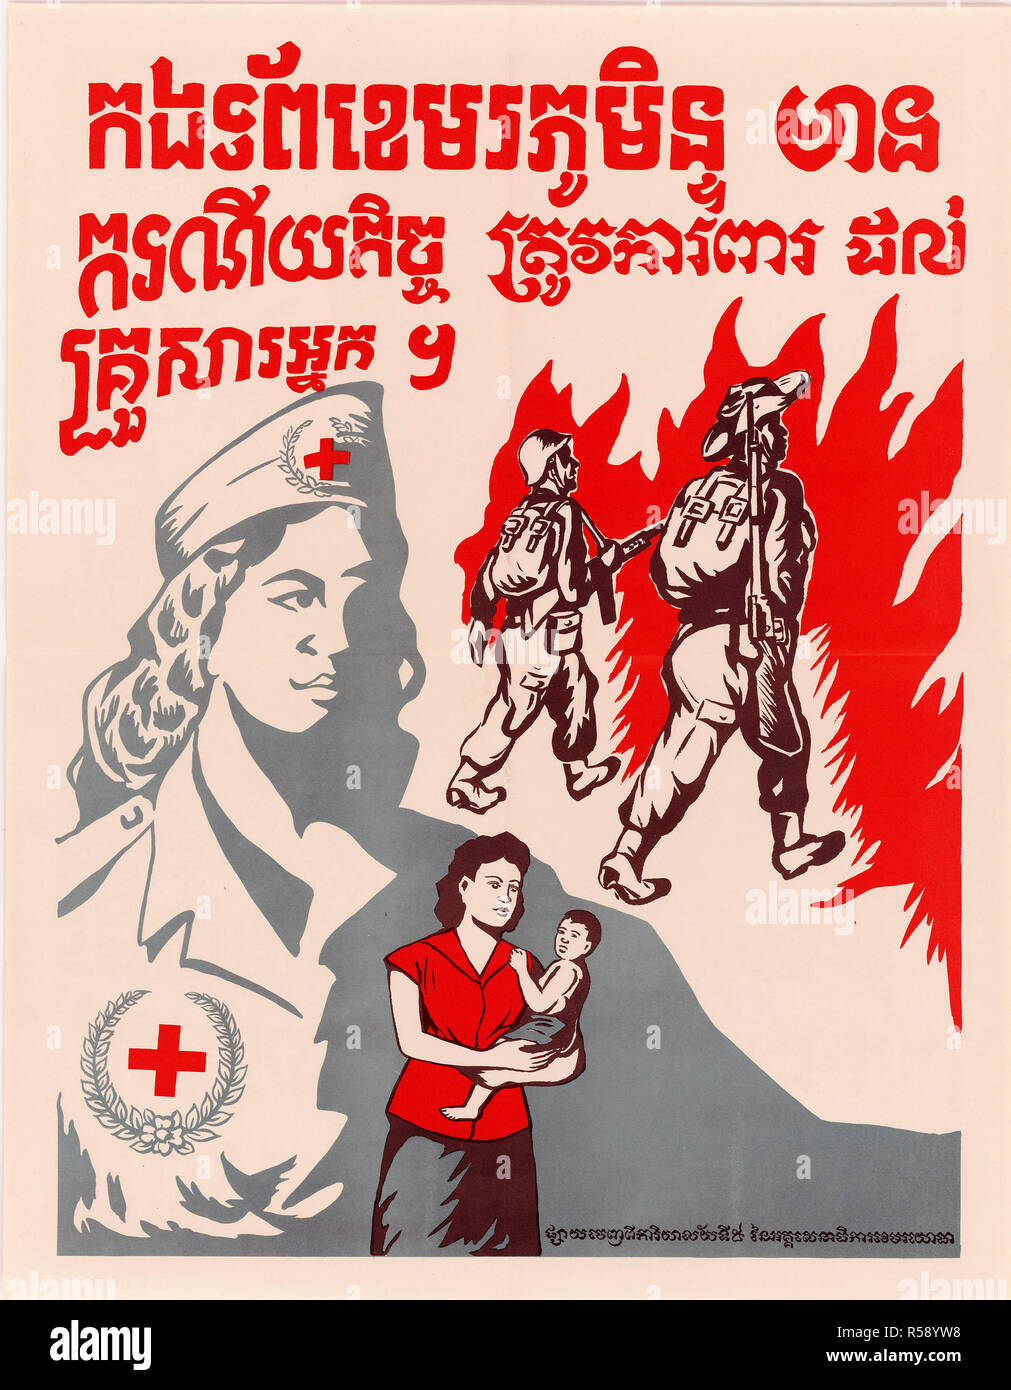 8/13/1954 - U.S. Propaganda Posters in 1950s Asia - The Duty of the Royal Cambodian is to Defend Your Family Poster (written in Khmer) Stock Photo